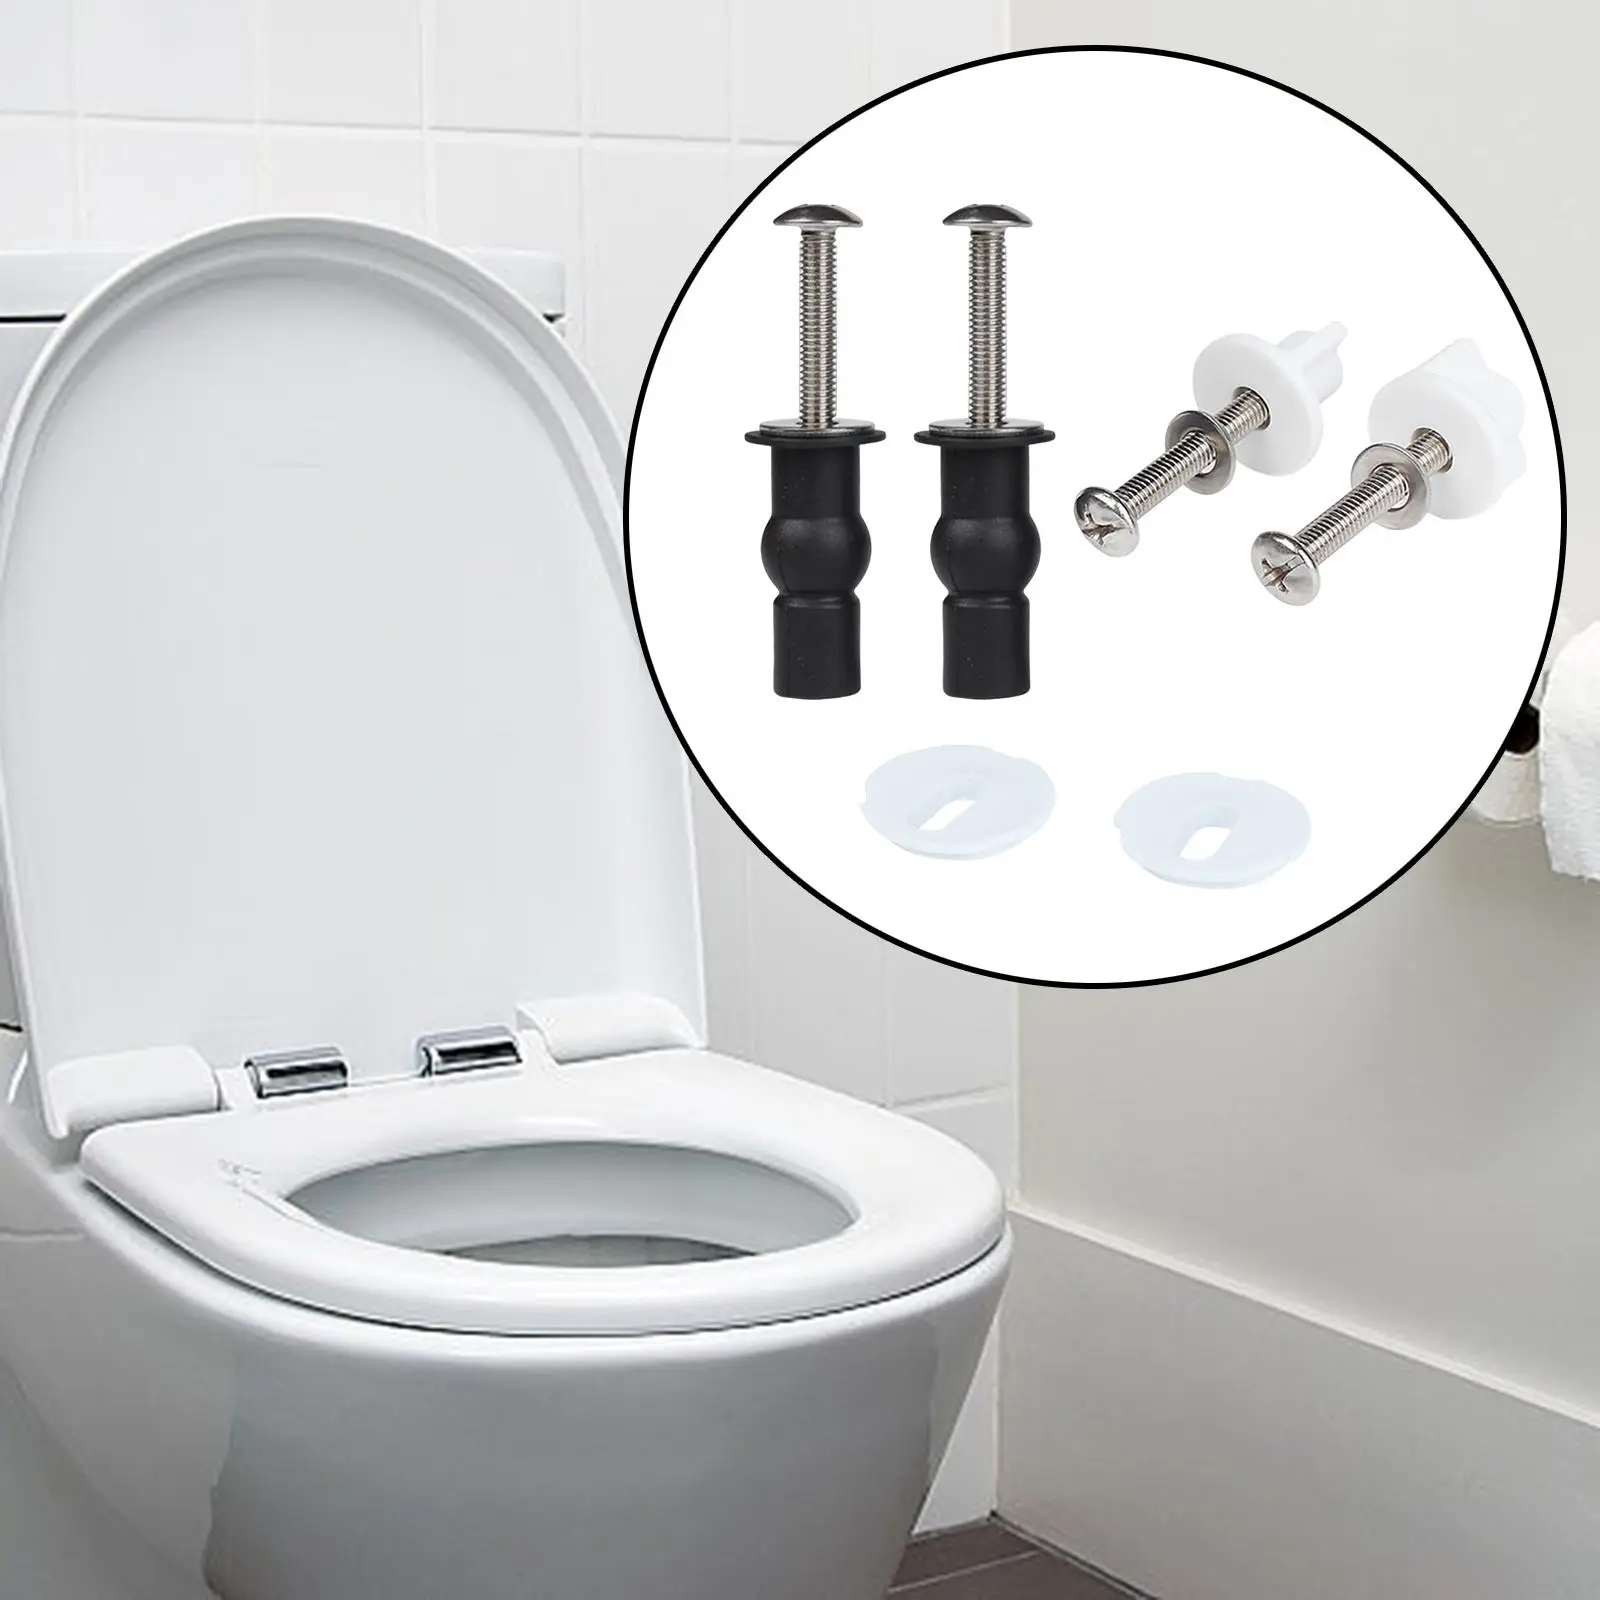 2 Pieces Toilet Seat Hinge Bolts and Screw Fixing Fittings Hardware Bathroom Toilet Repair Screw Top Mounted Toilet Seat Hinges